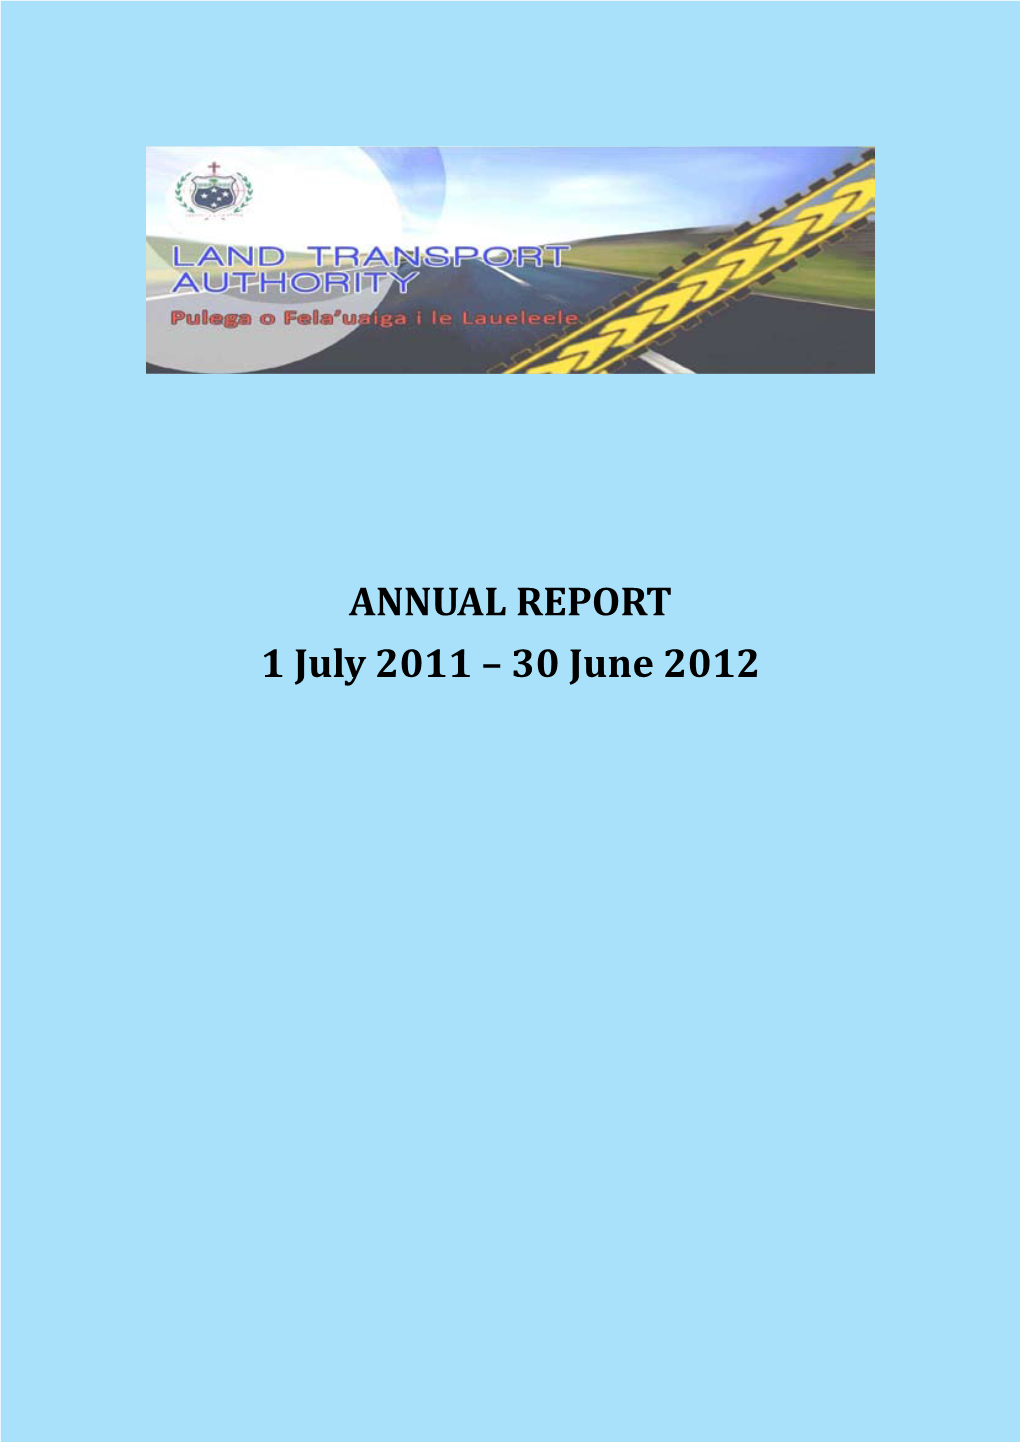 ANNUAL REPORT 1 July 2011 – 30 June 2012 OFFICE ADDRESS Land Transport Authority Private Bag Vaitele Apia